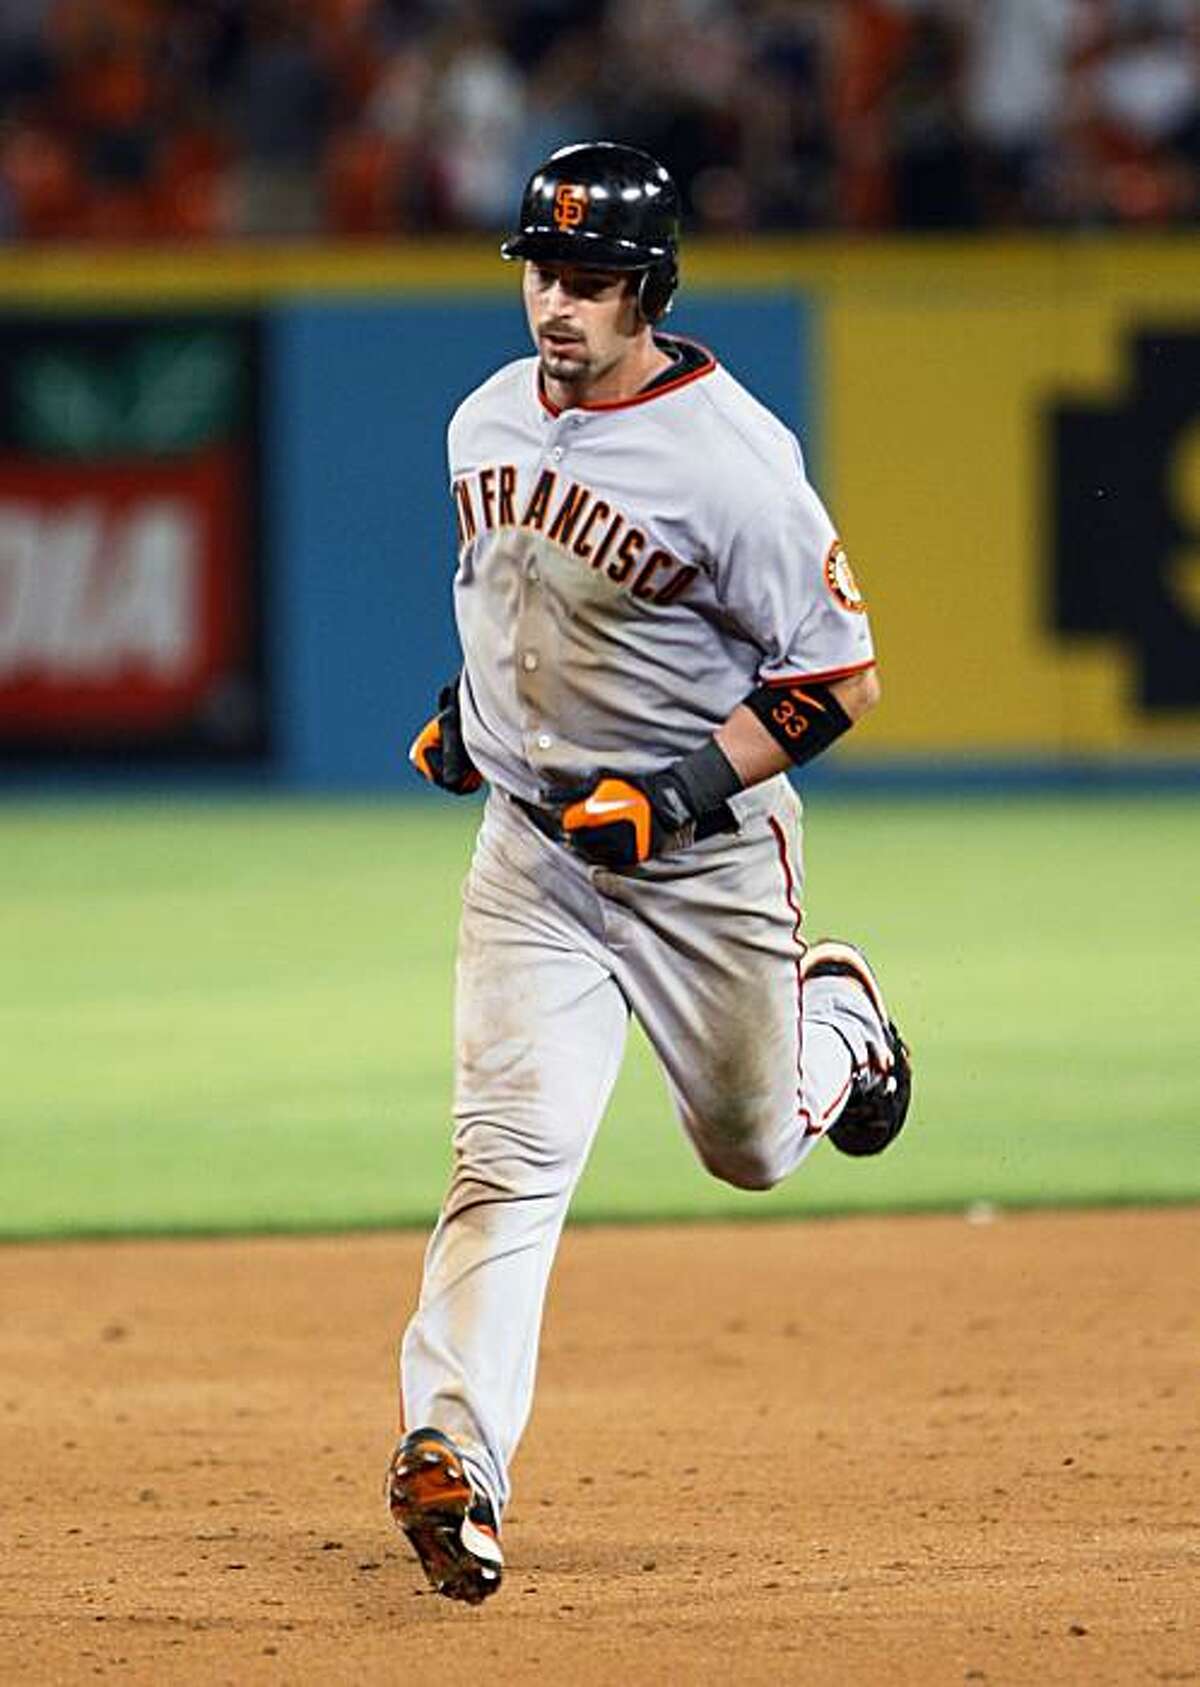 San Francisco Giants' Aaron Rowand rounds second base after he hit a two-out solo home run during the ninth inning of a baseball game against the Florida Marlins, Tuesday, May 4, 2010 in Miami. The Giants defeated the Marlins 9-6 in 12 innings.